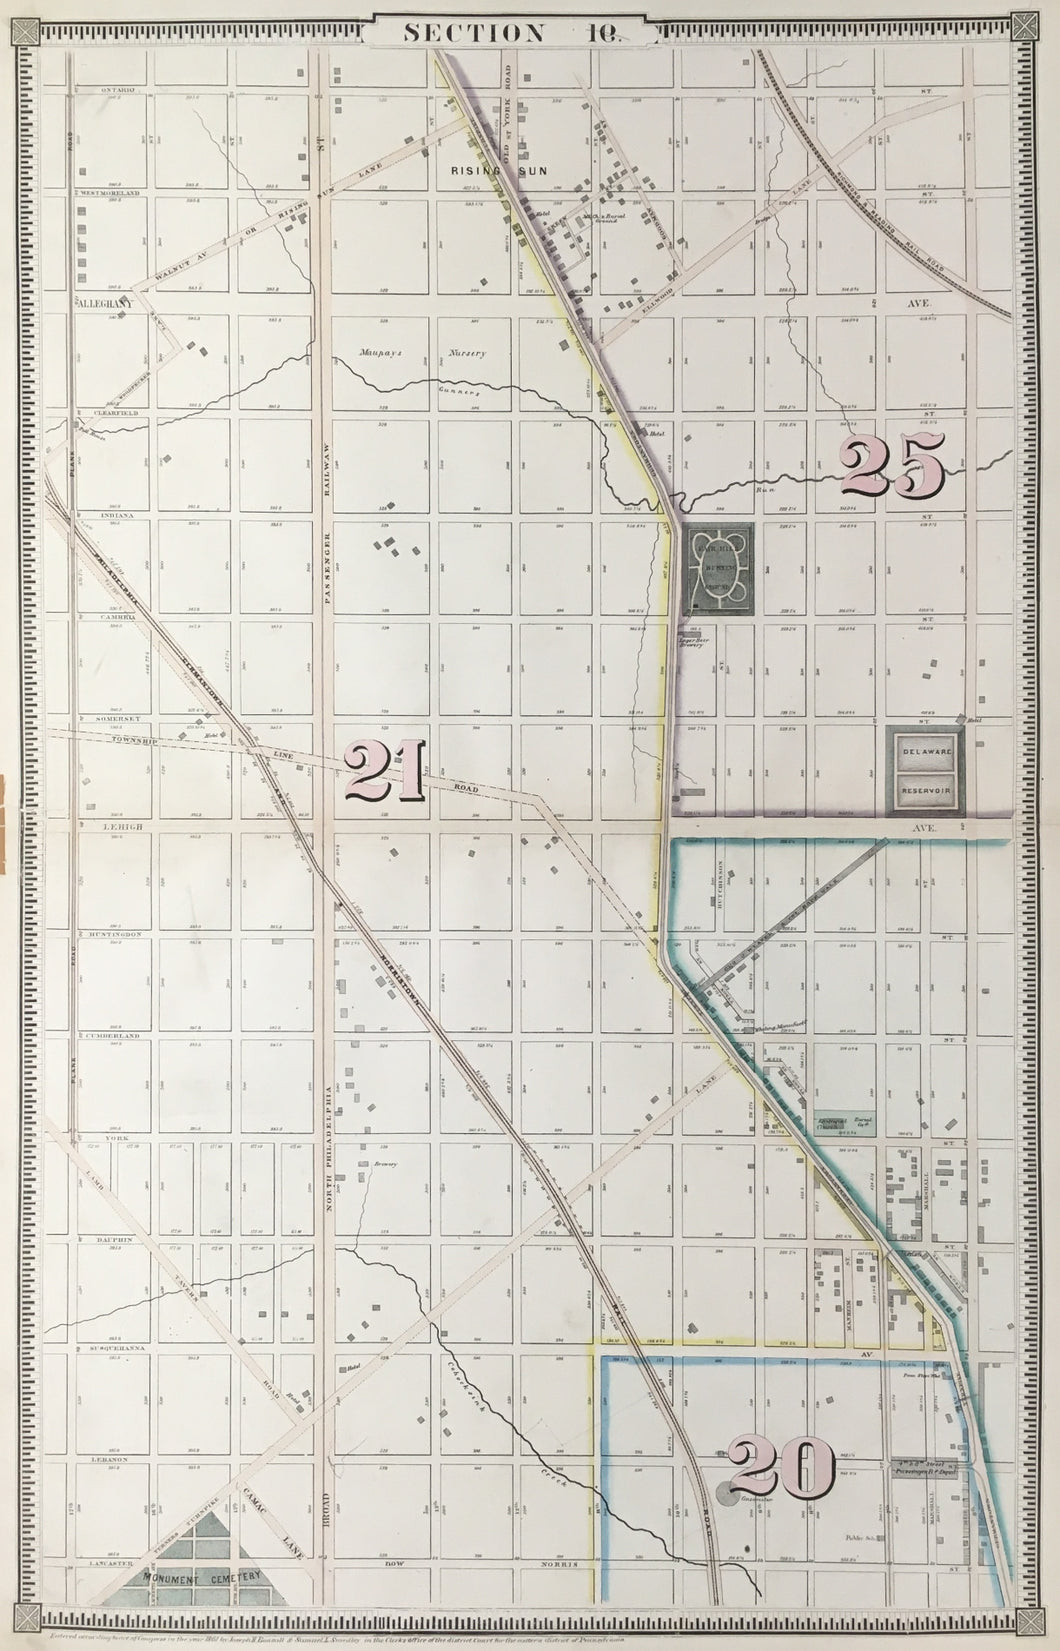 Bonsall & Smedley.  “Section 19.”  [Glenwood and North Central Philadelphia area: From Ontario Street south to Norris Street and from North 17th Street to North 6th Street]